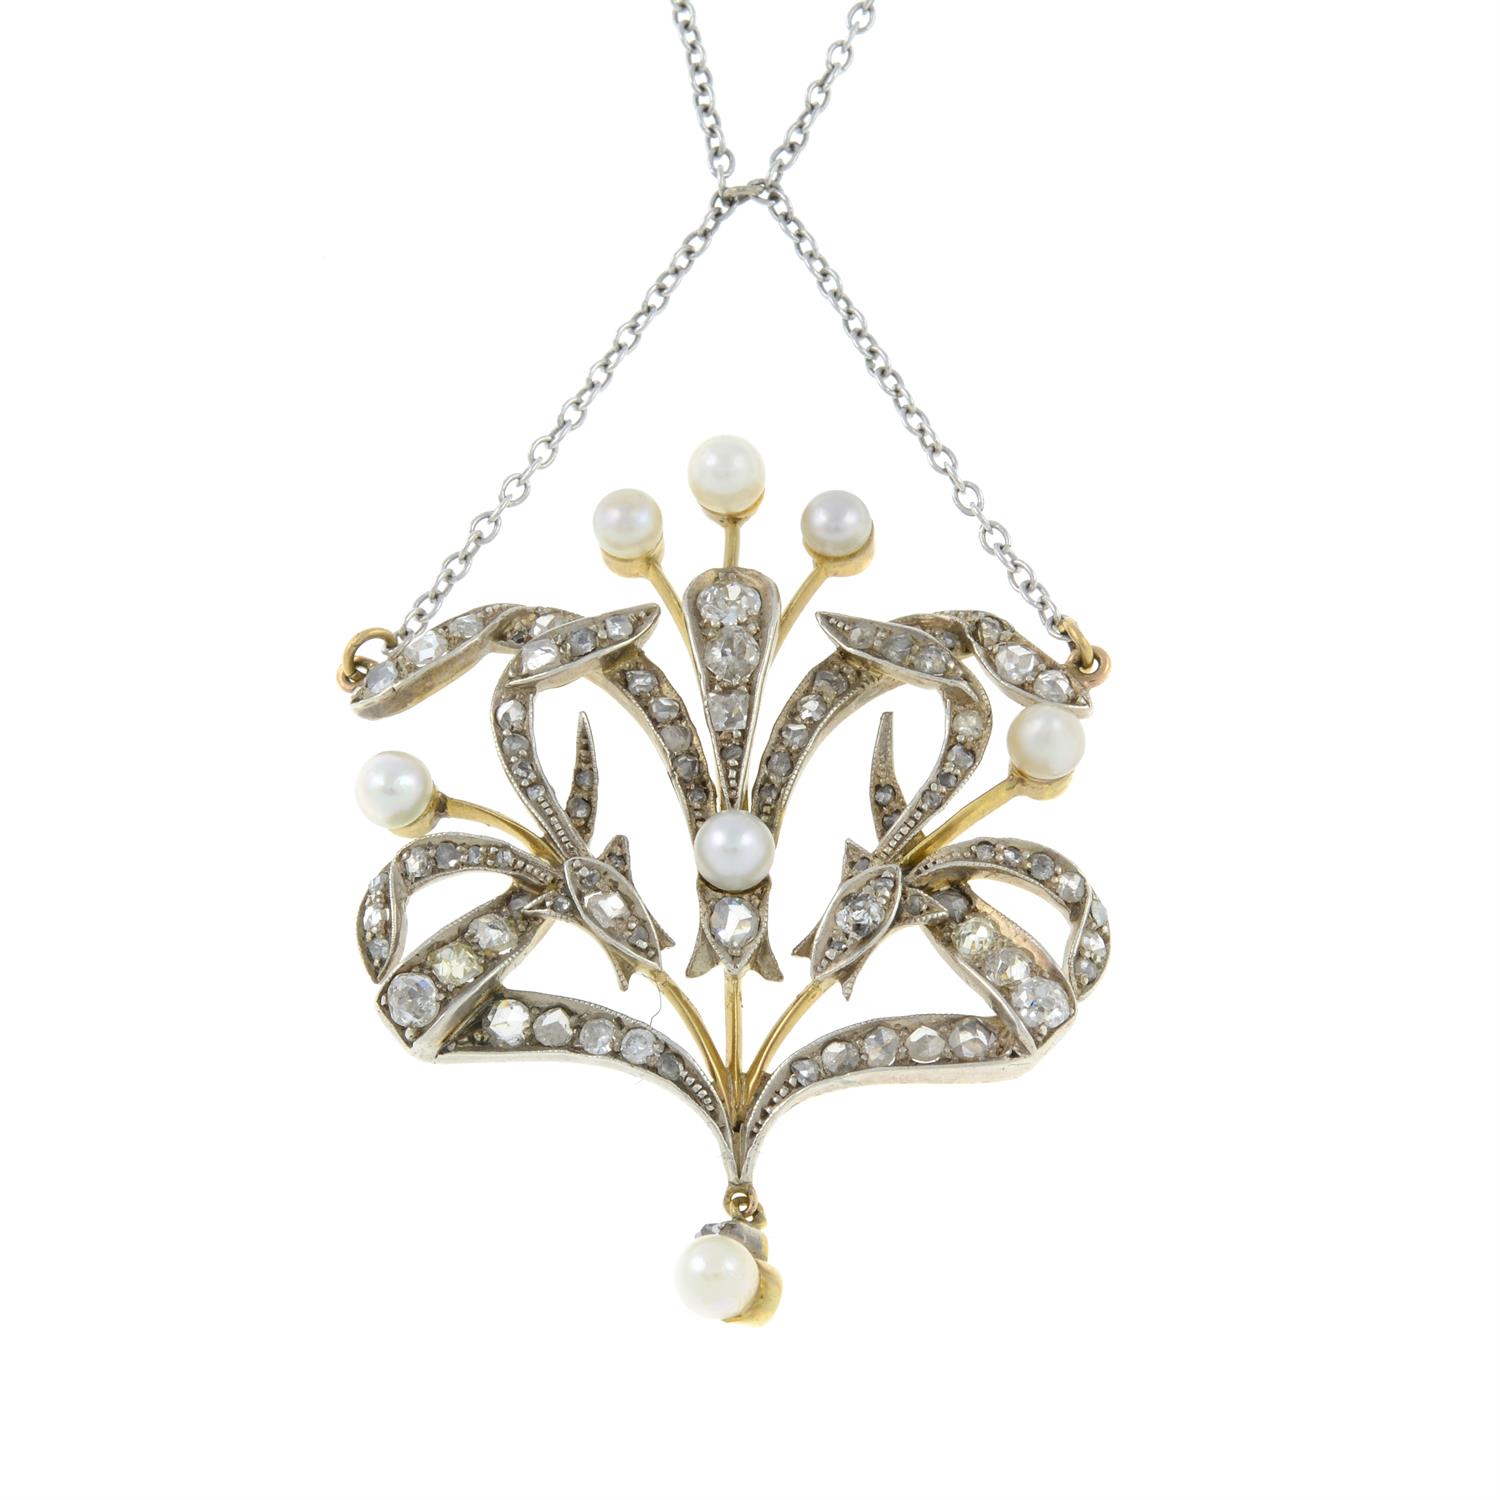 An early 20th century gold vari-cut diamond and cultured pearl pendant, suspended from a later